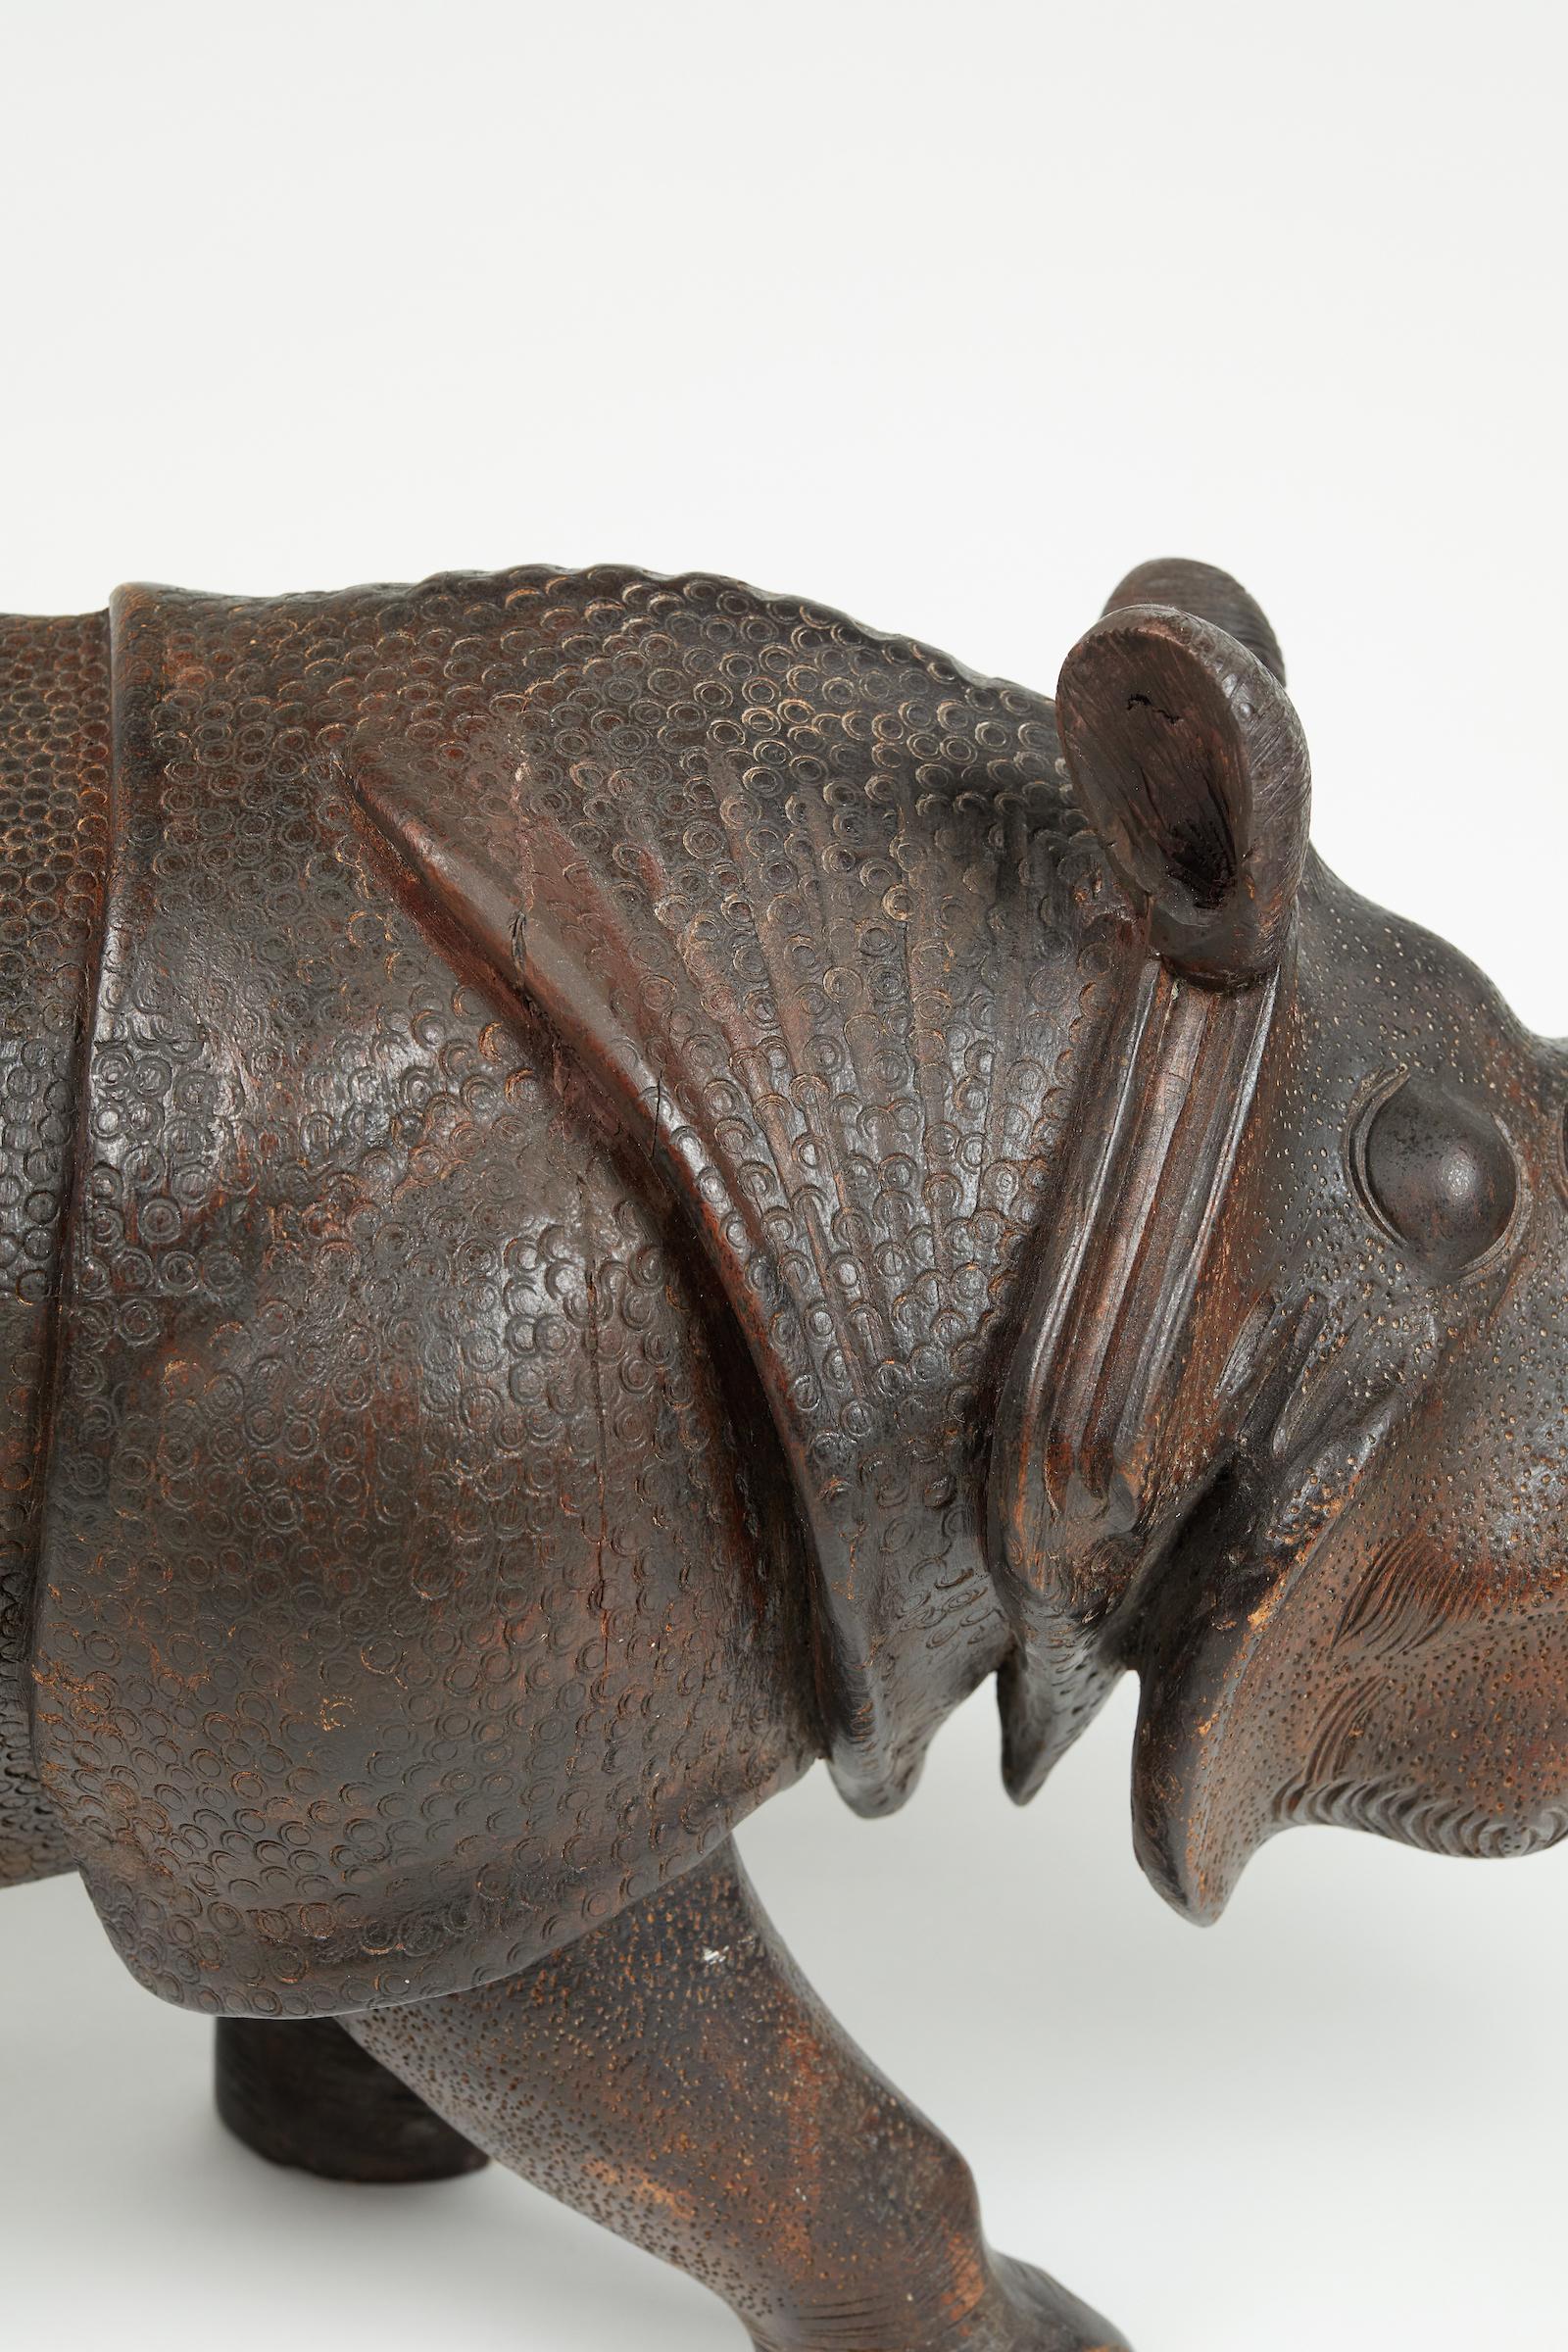 Finely Carved Wood Indian Rhino Sculpture 2